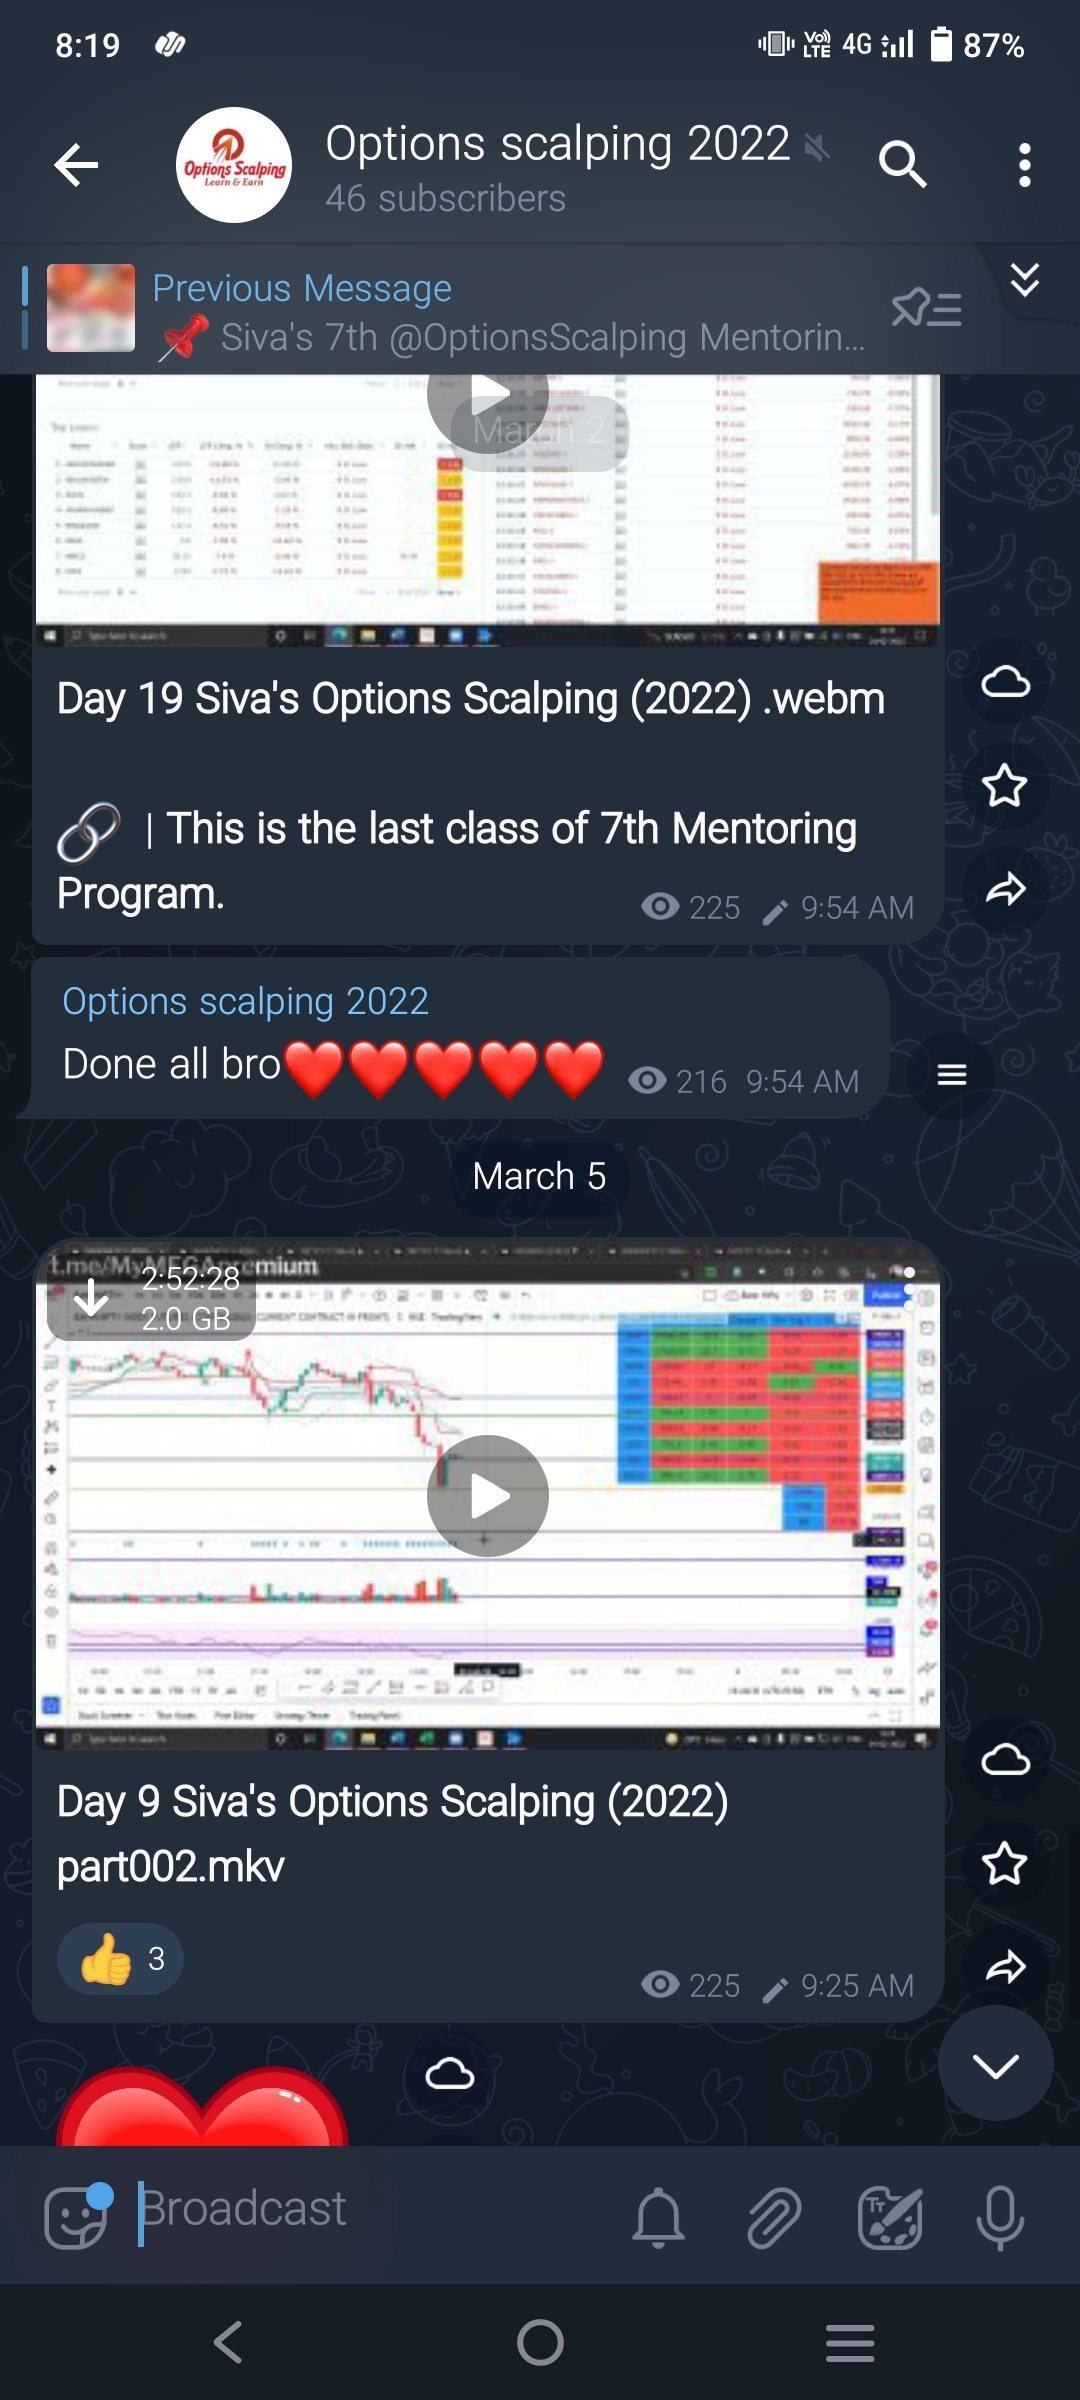 Options Scalping 2022 Mentoring Program Full Course